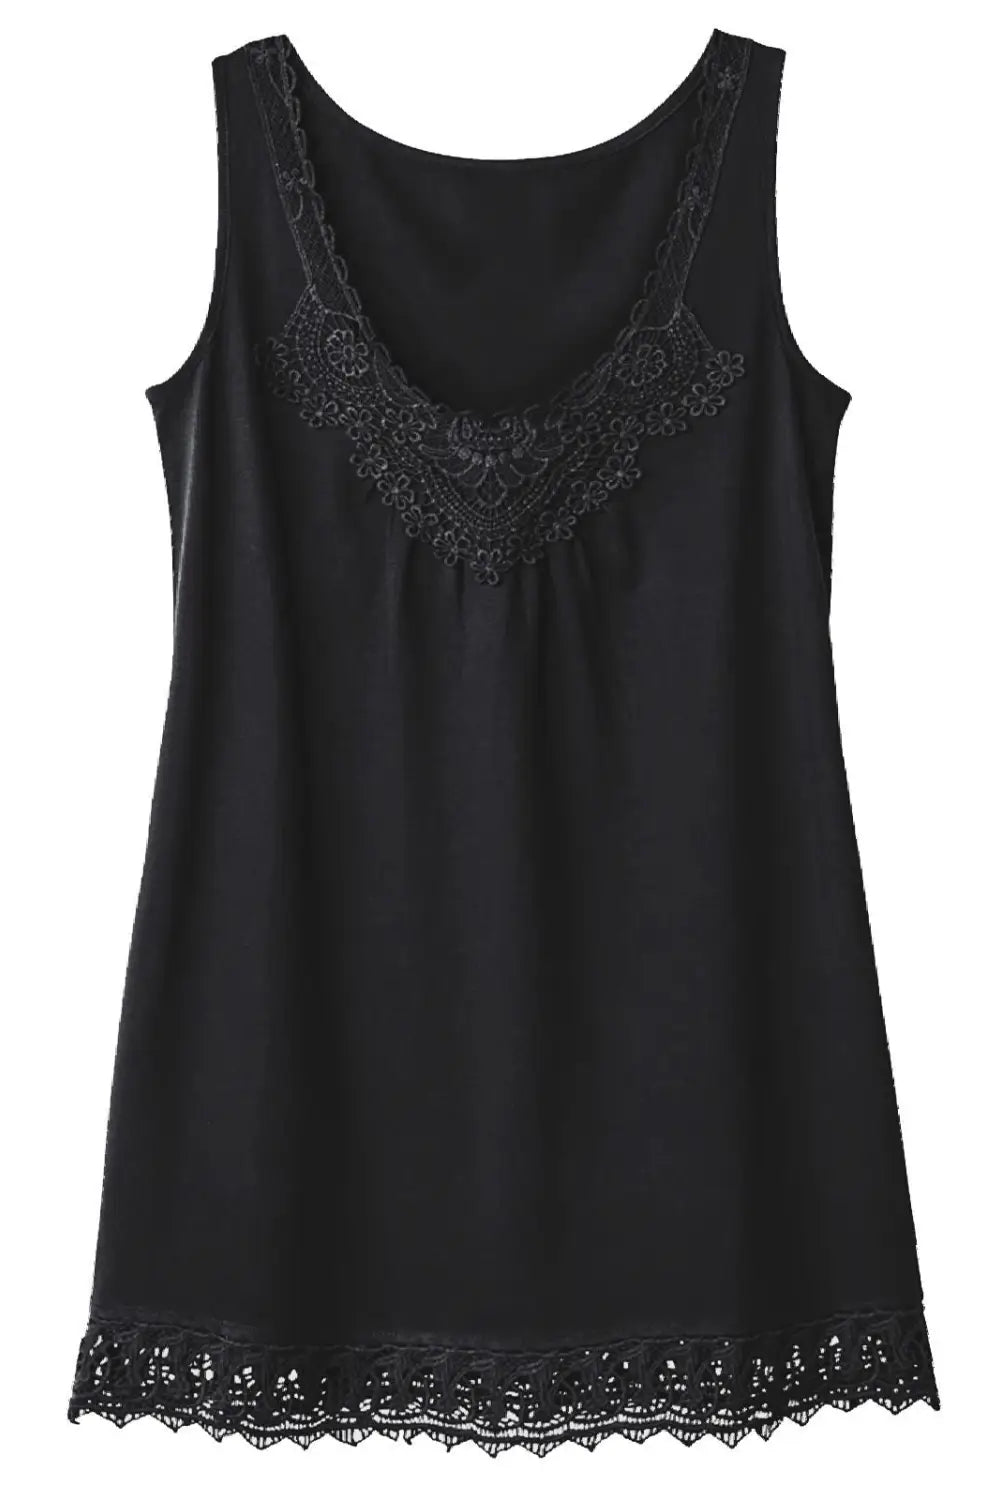 Blancheport Lace Trim Sleeveless Top